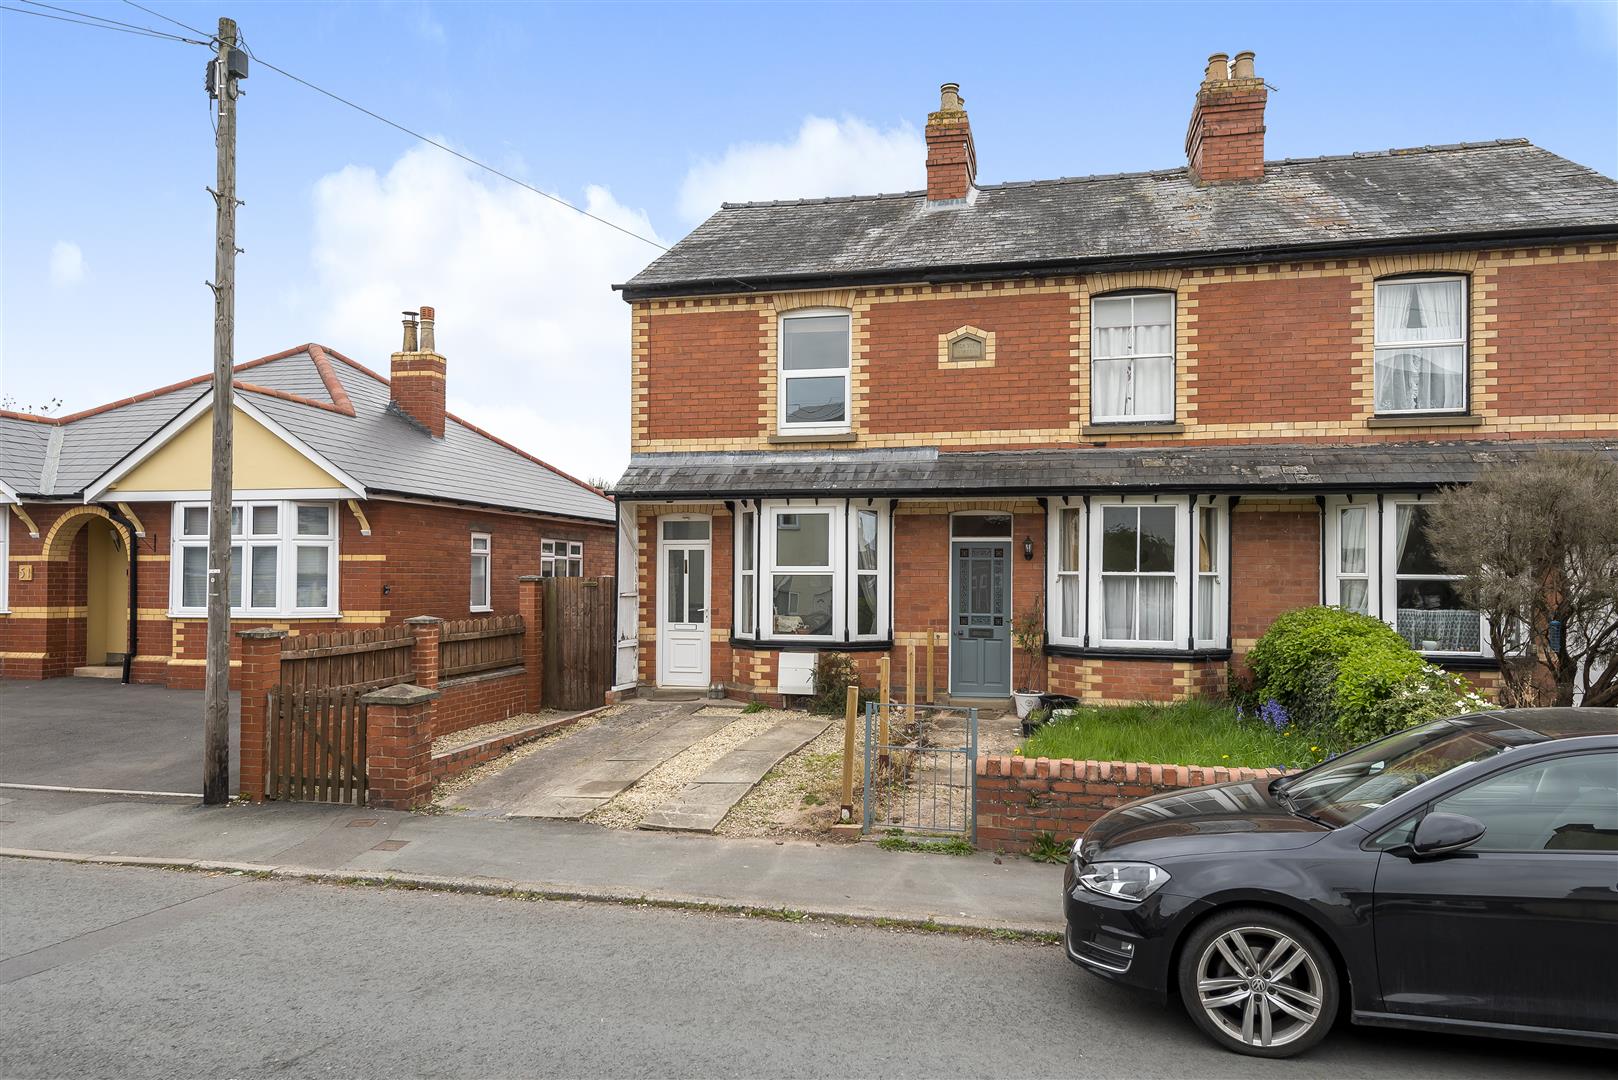 2 bed end of terrace for sale - Property Image 1